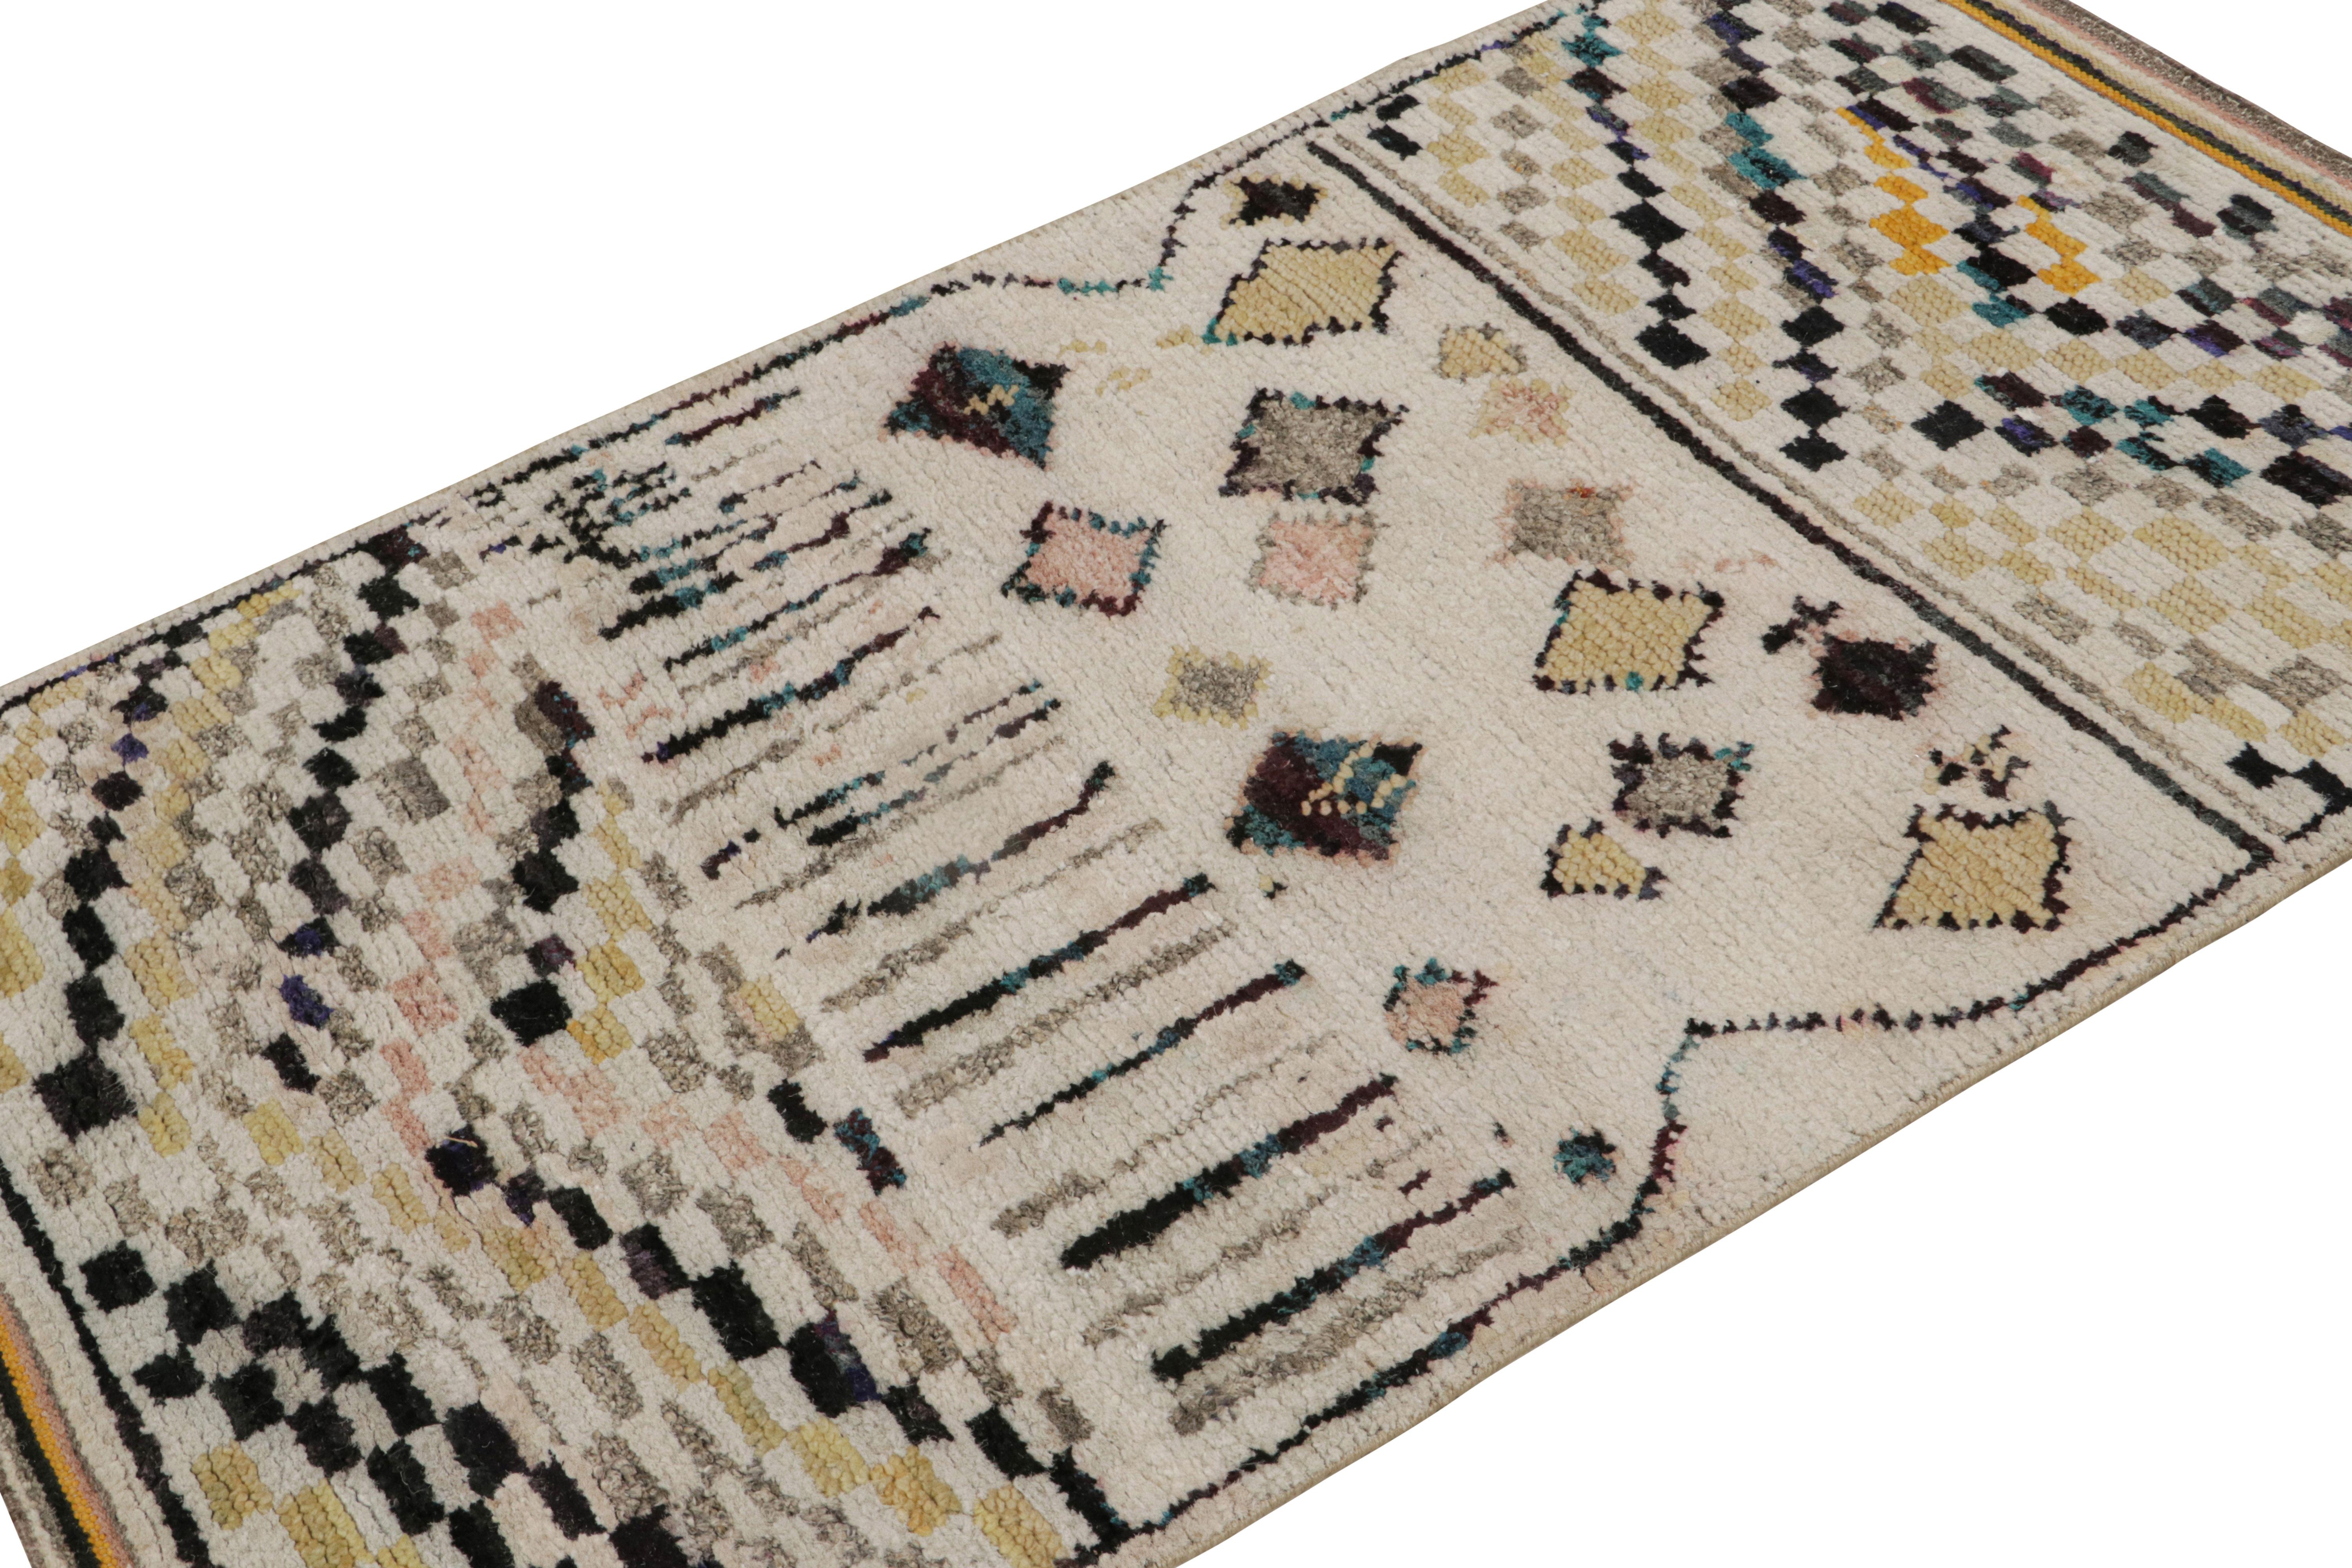 Hand-knotted in wool, silk and cotton, this 3x5 contemporary Moroccan style rug with primitivist berber geometric patterns, exemplifies Rug & Kilim’s take on contemporary aesthetics. 

On the Design: 

Connoisseurs may admire the texture in this